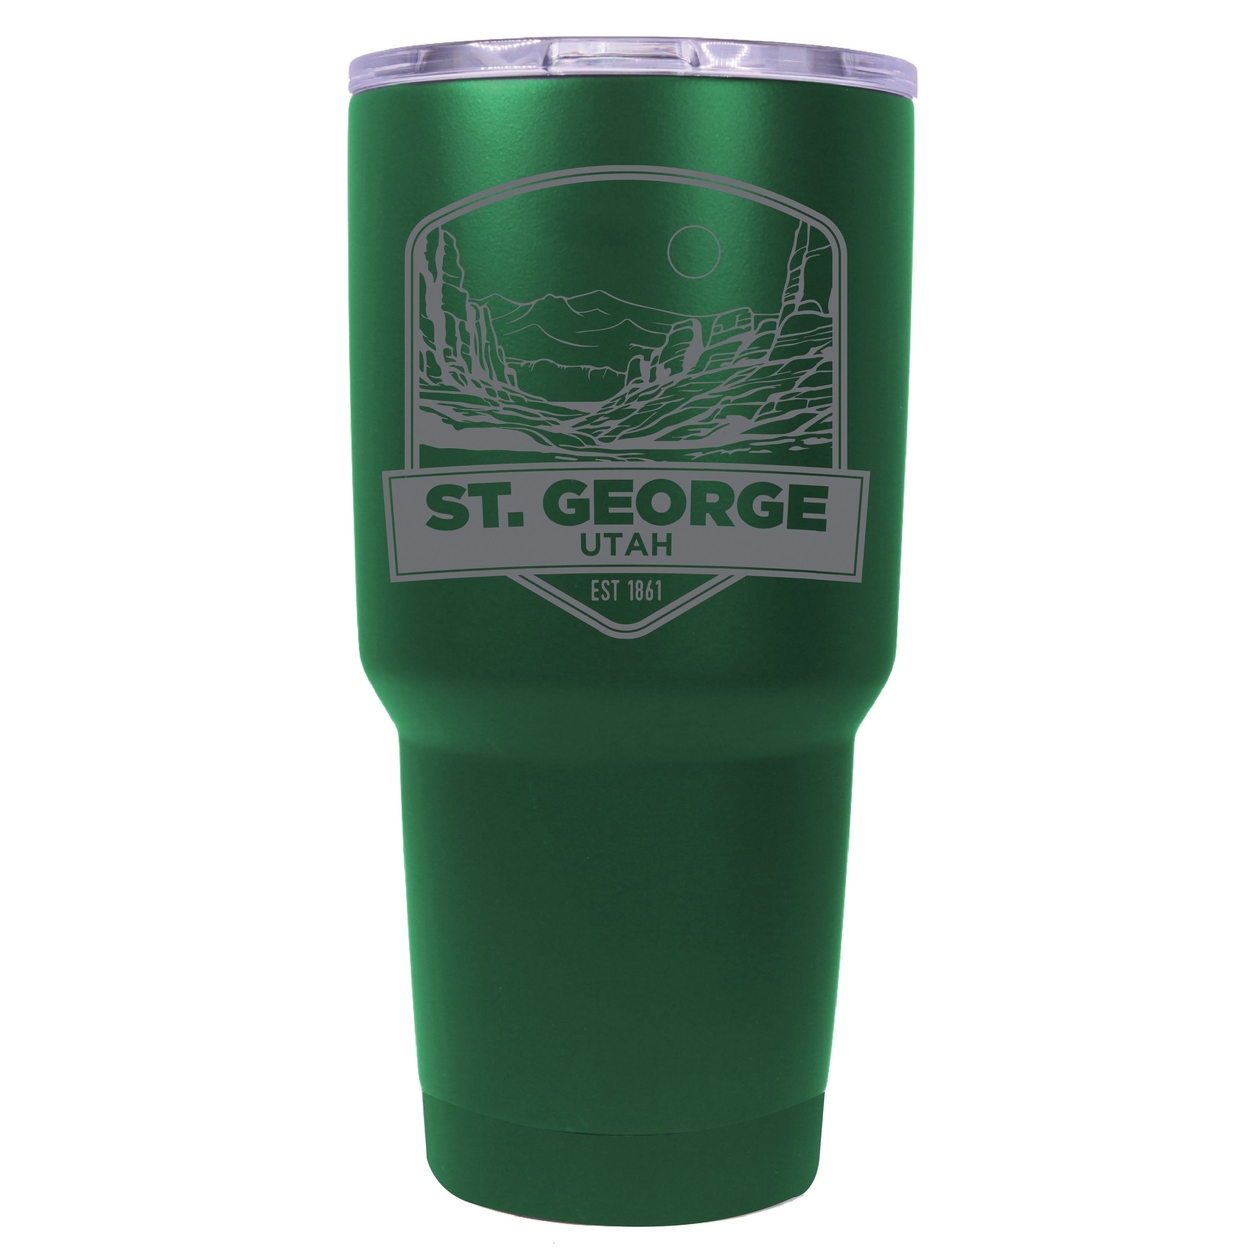 St. George Utah Souvenir 24 Oz Engraved Insulated Stainless Steel Tumbler - Green,,Single Unit